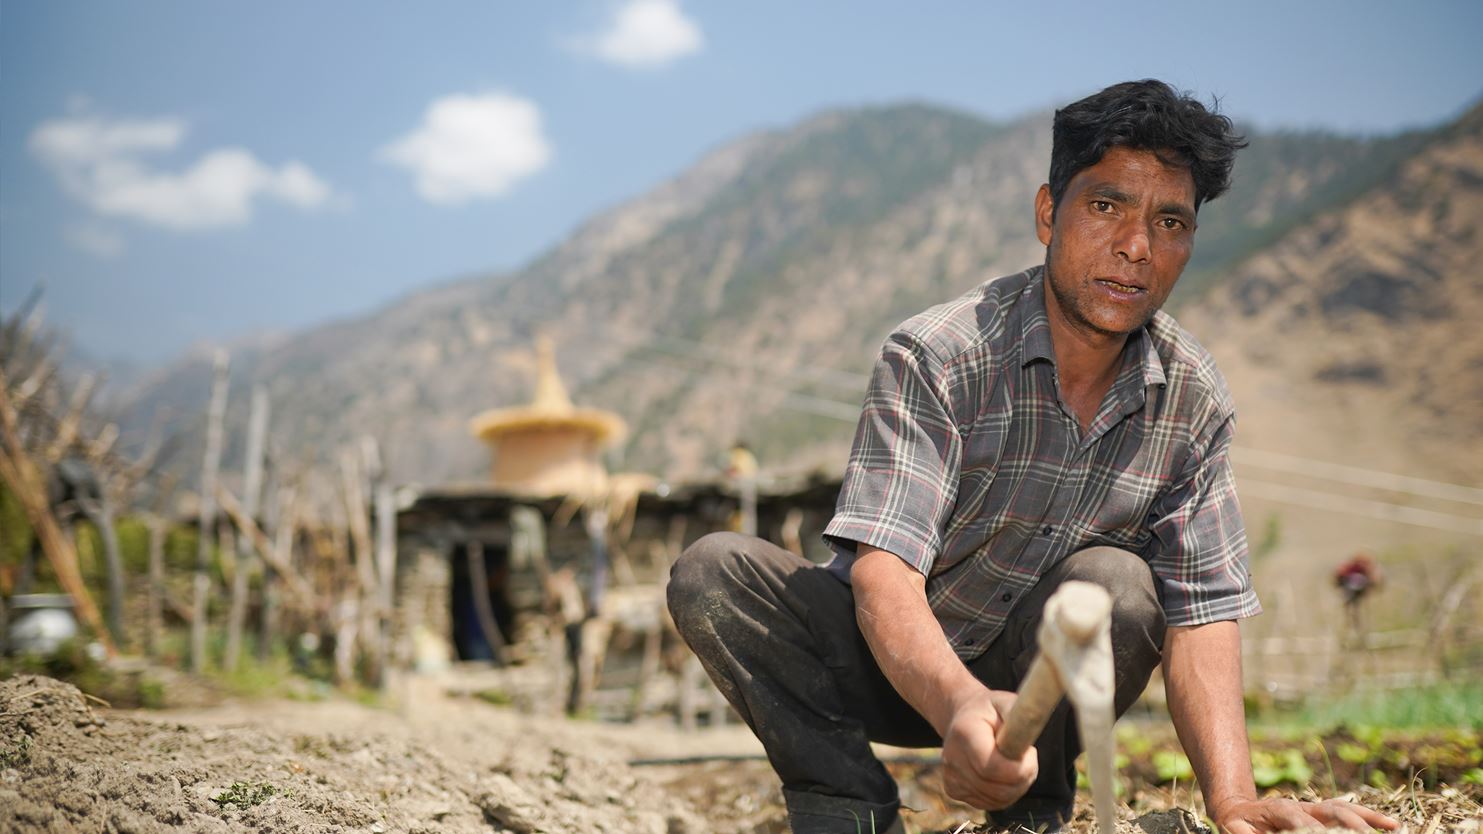 A man using a farming tool with mountains in the background